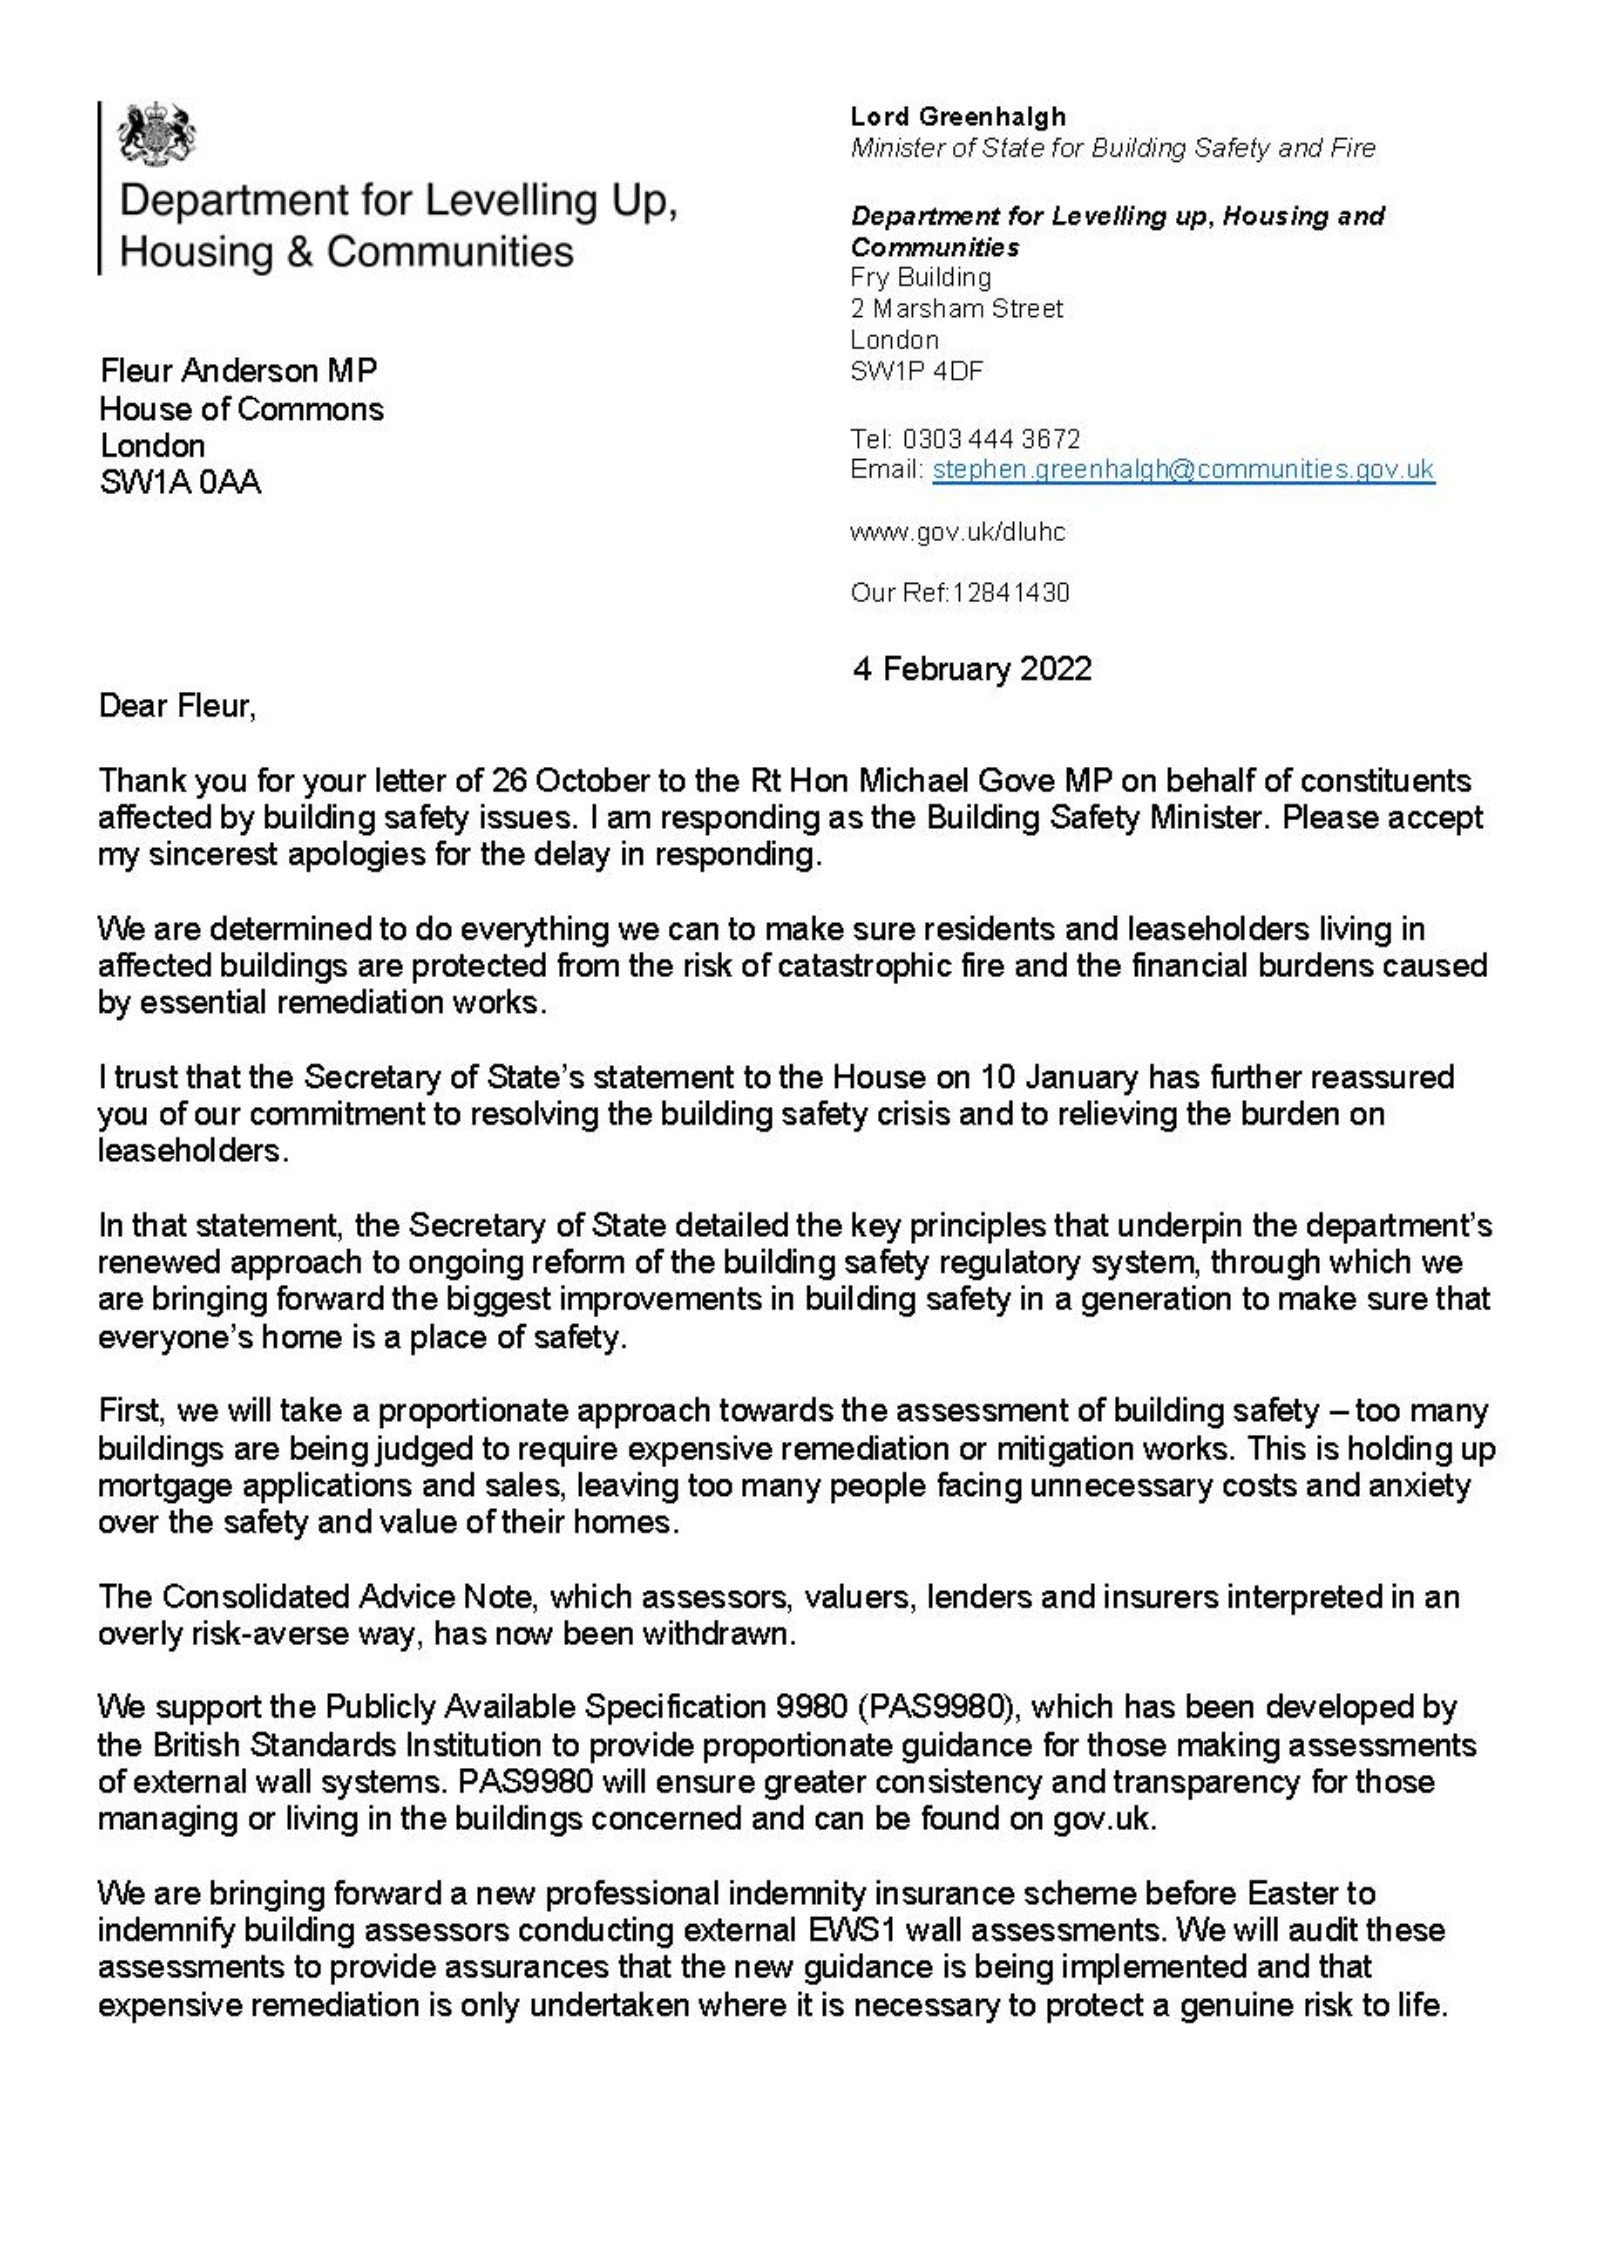 Response from Lord Greenhalgh on Building Safety Issues - Page 1